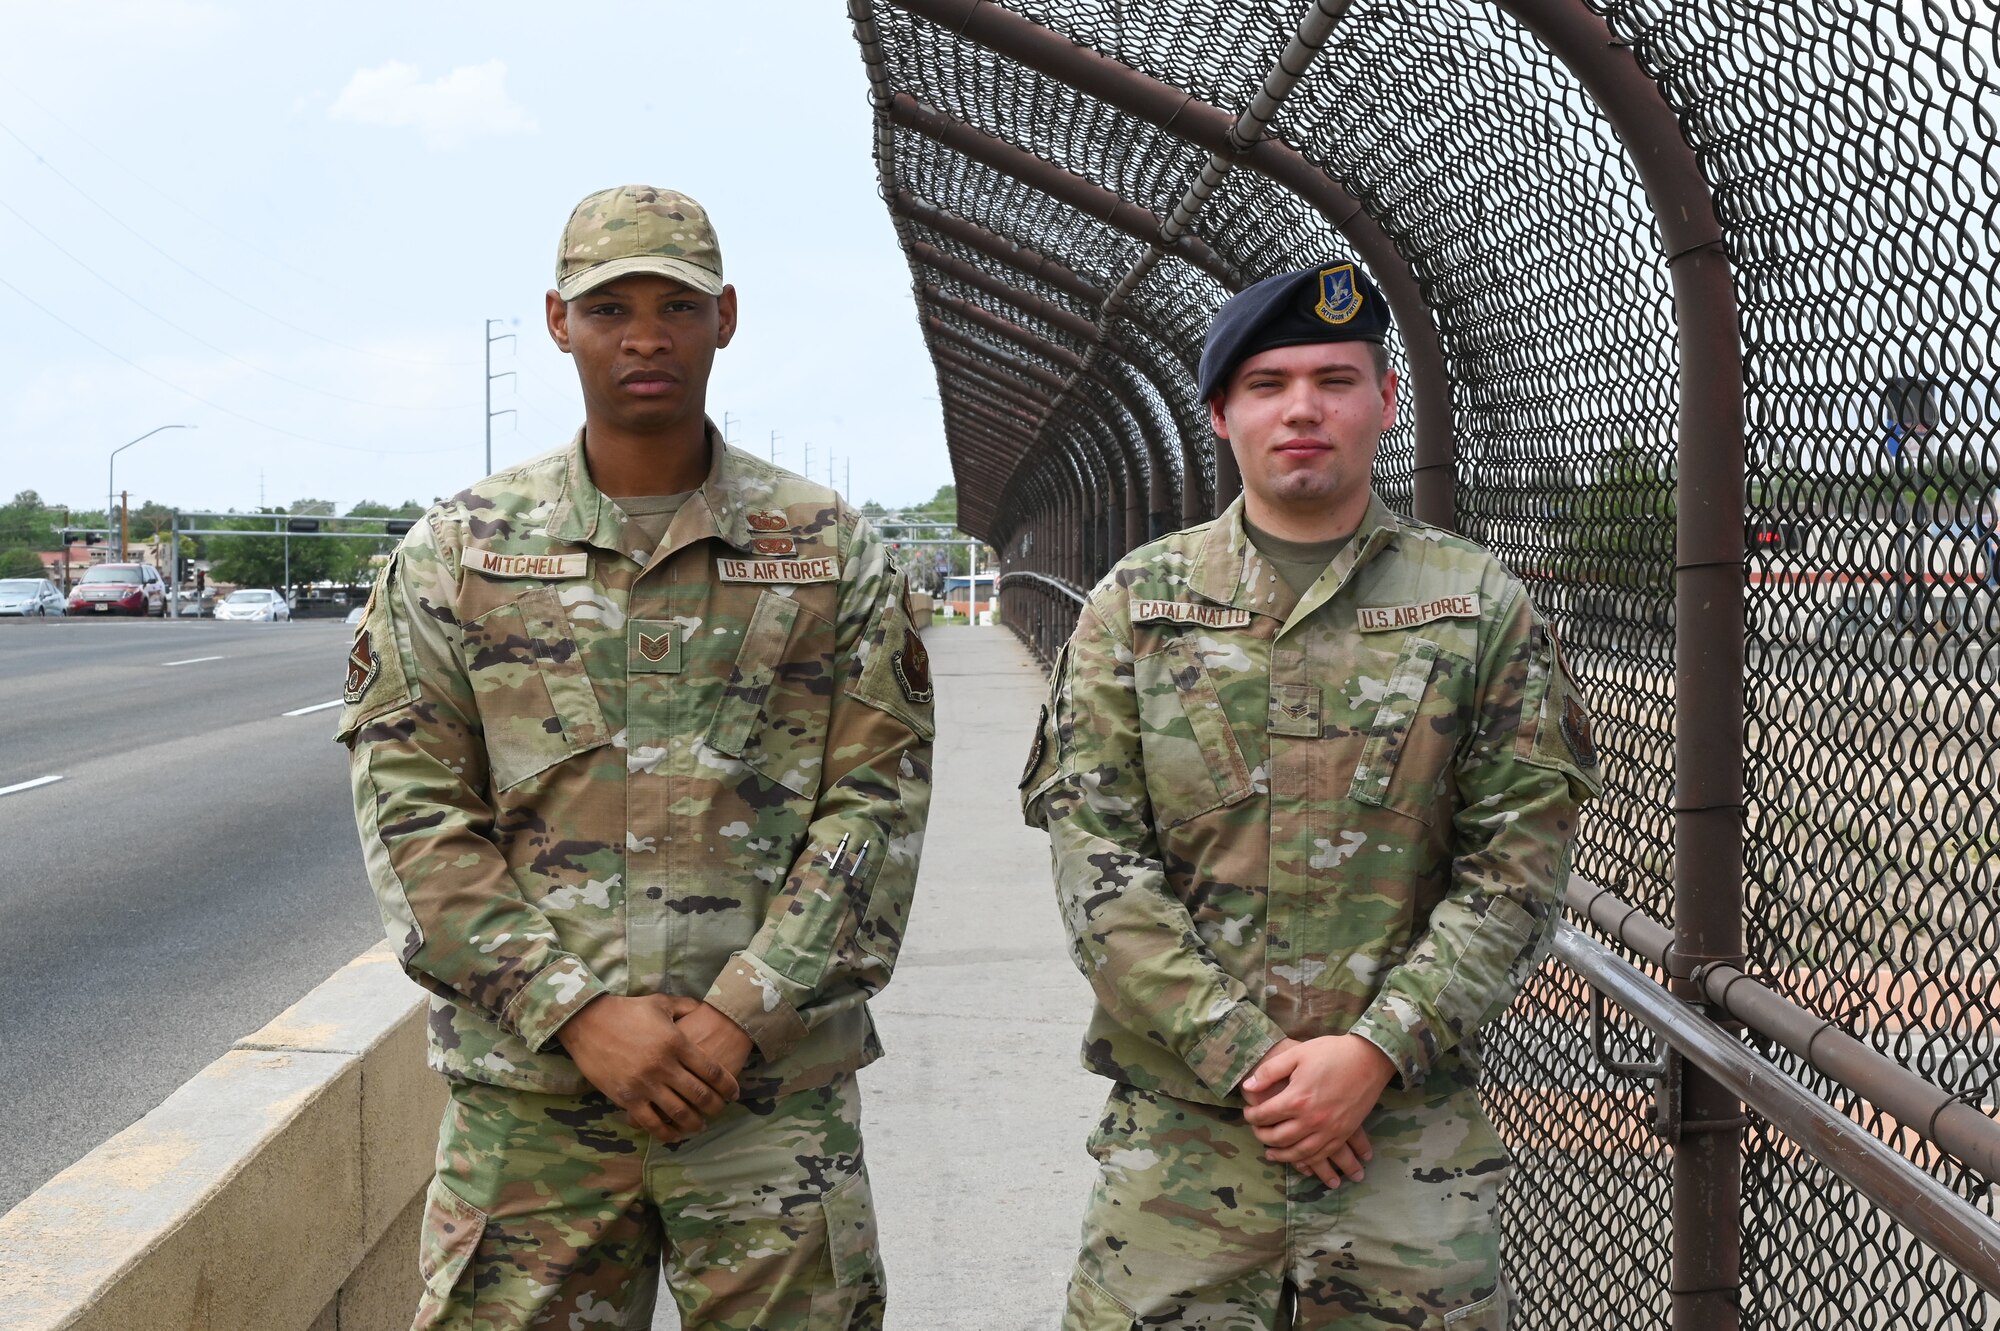 Two men stand together on an overpass.